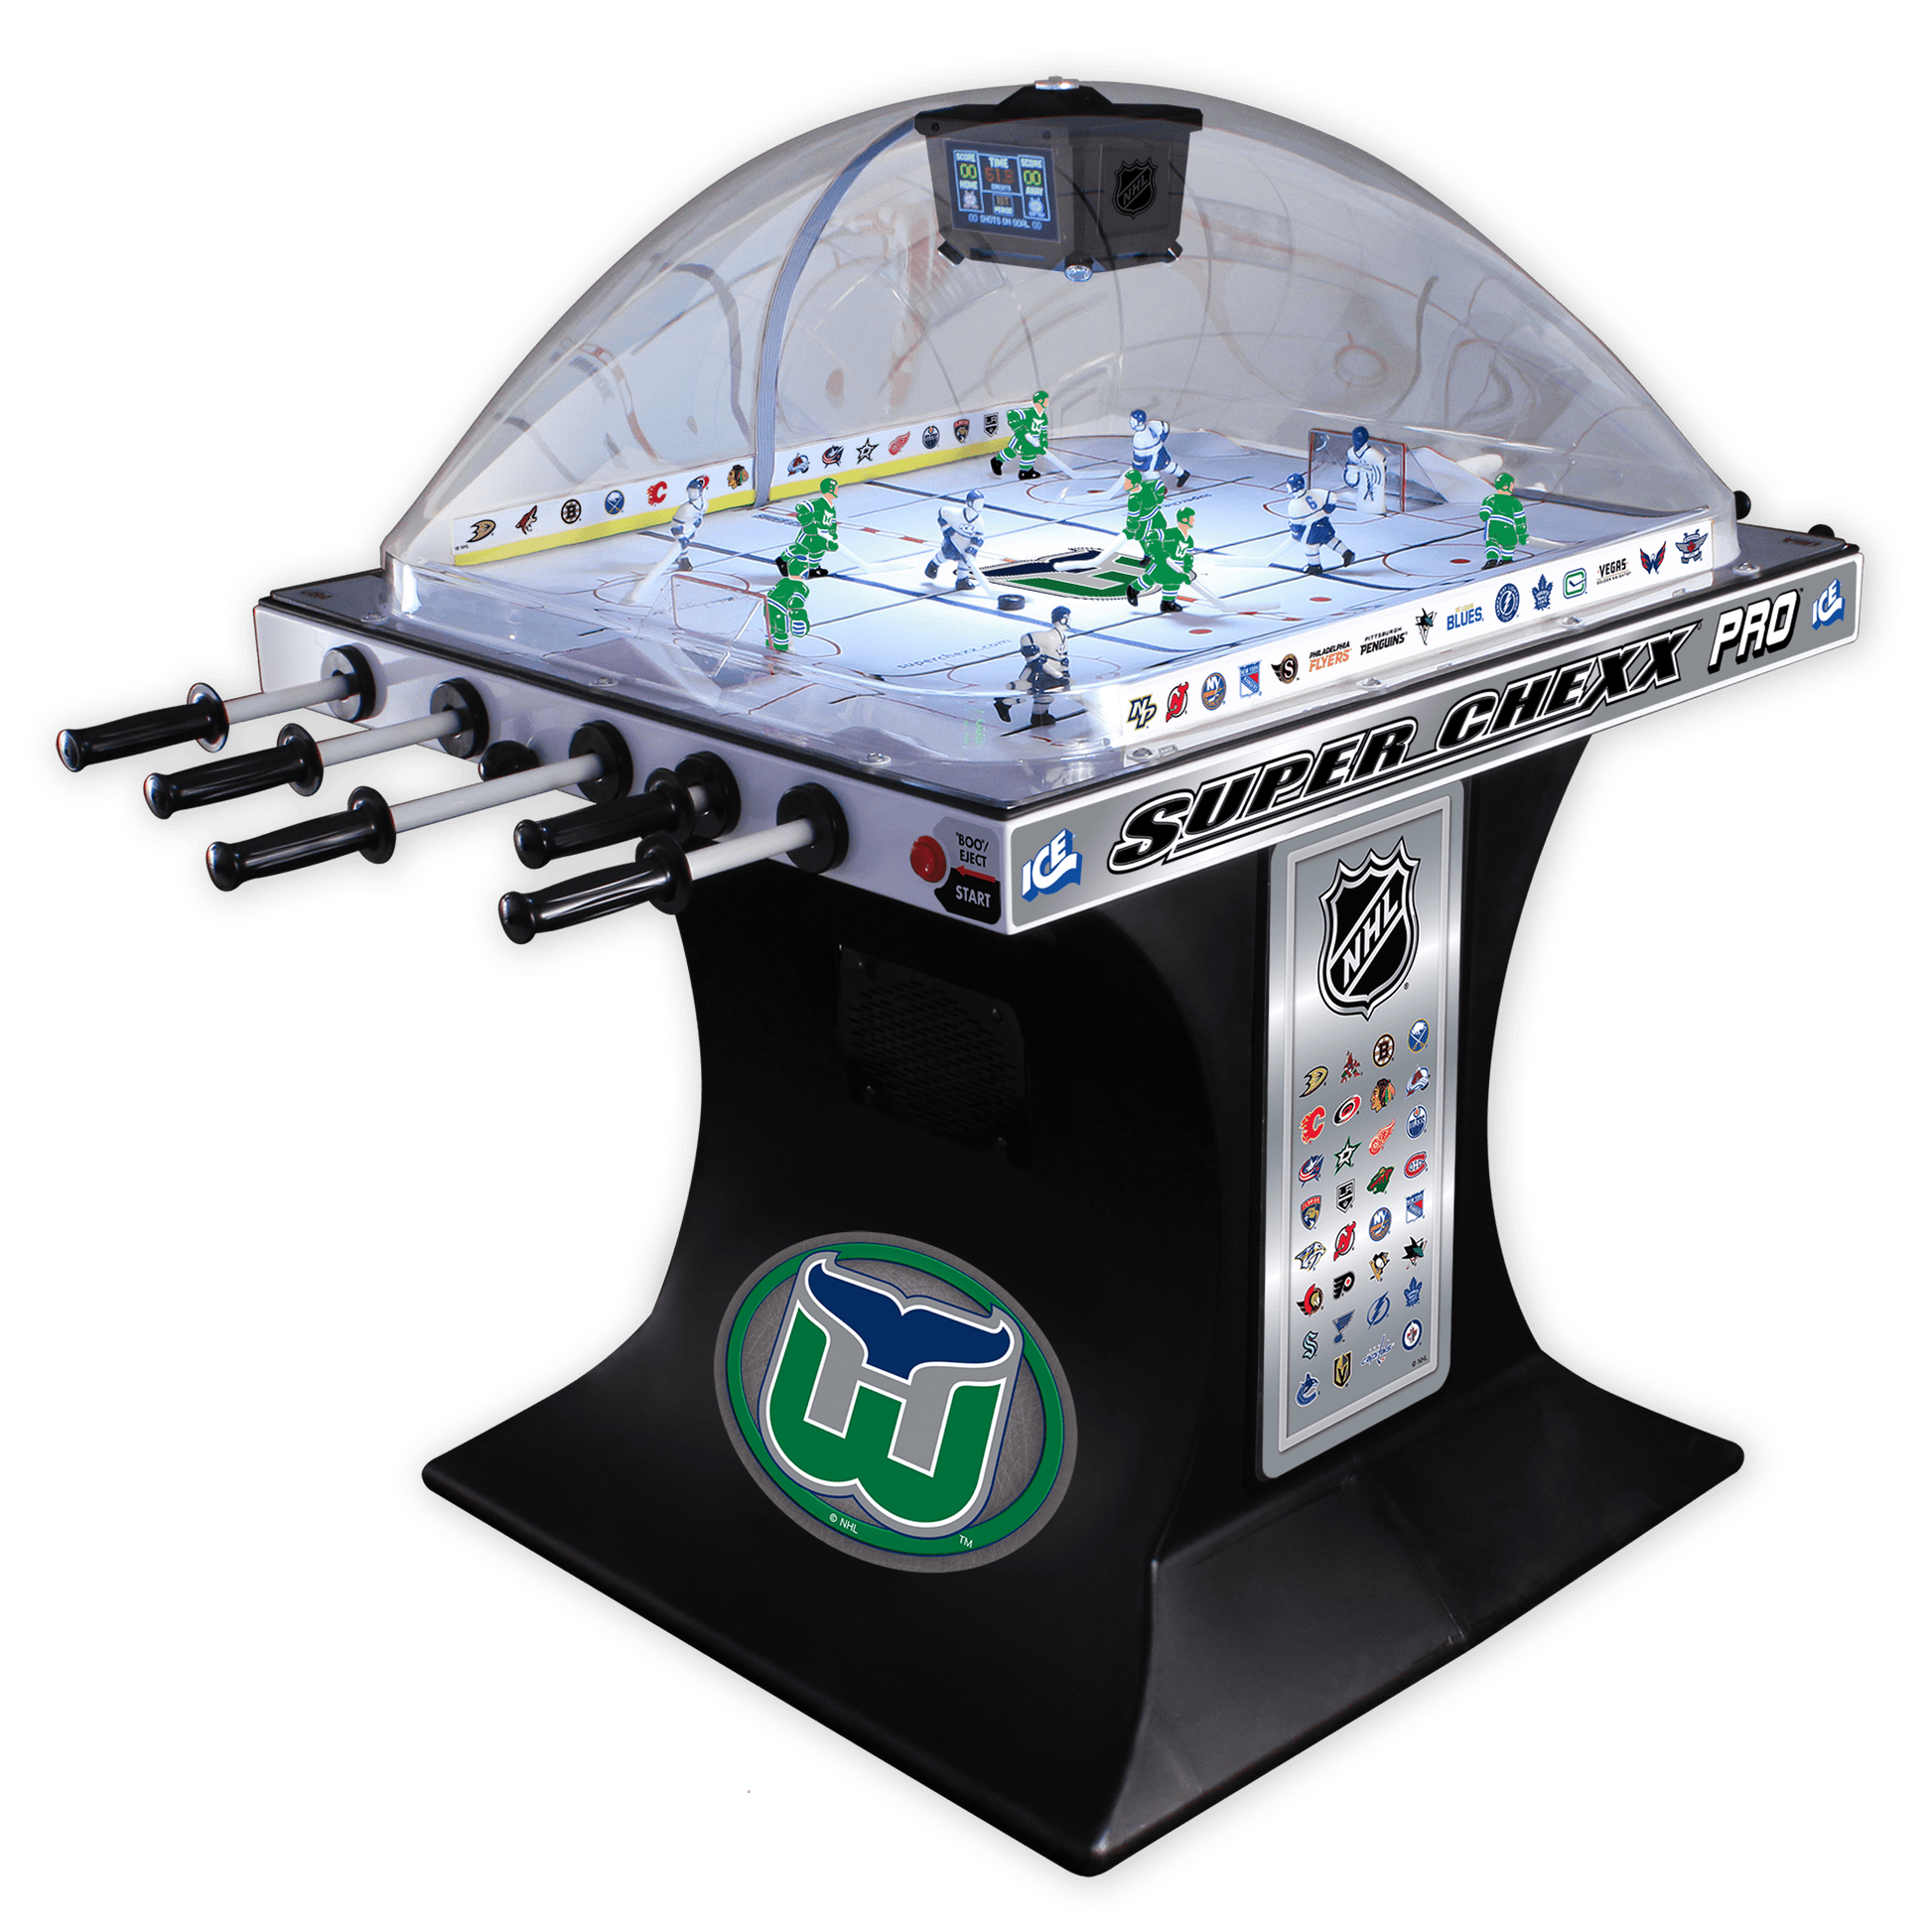 Hartford Whalers NHL Super Chexx Pro Bubble Hockey Arcade Innovative Concepts in Entertainment   